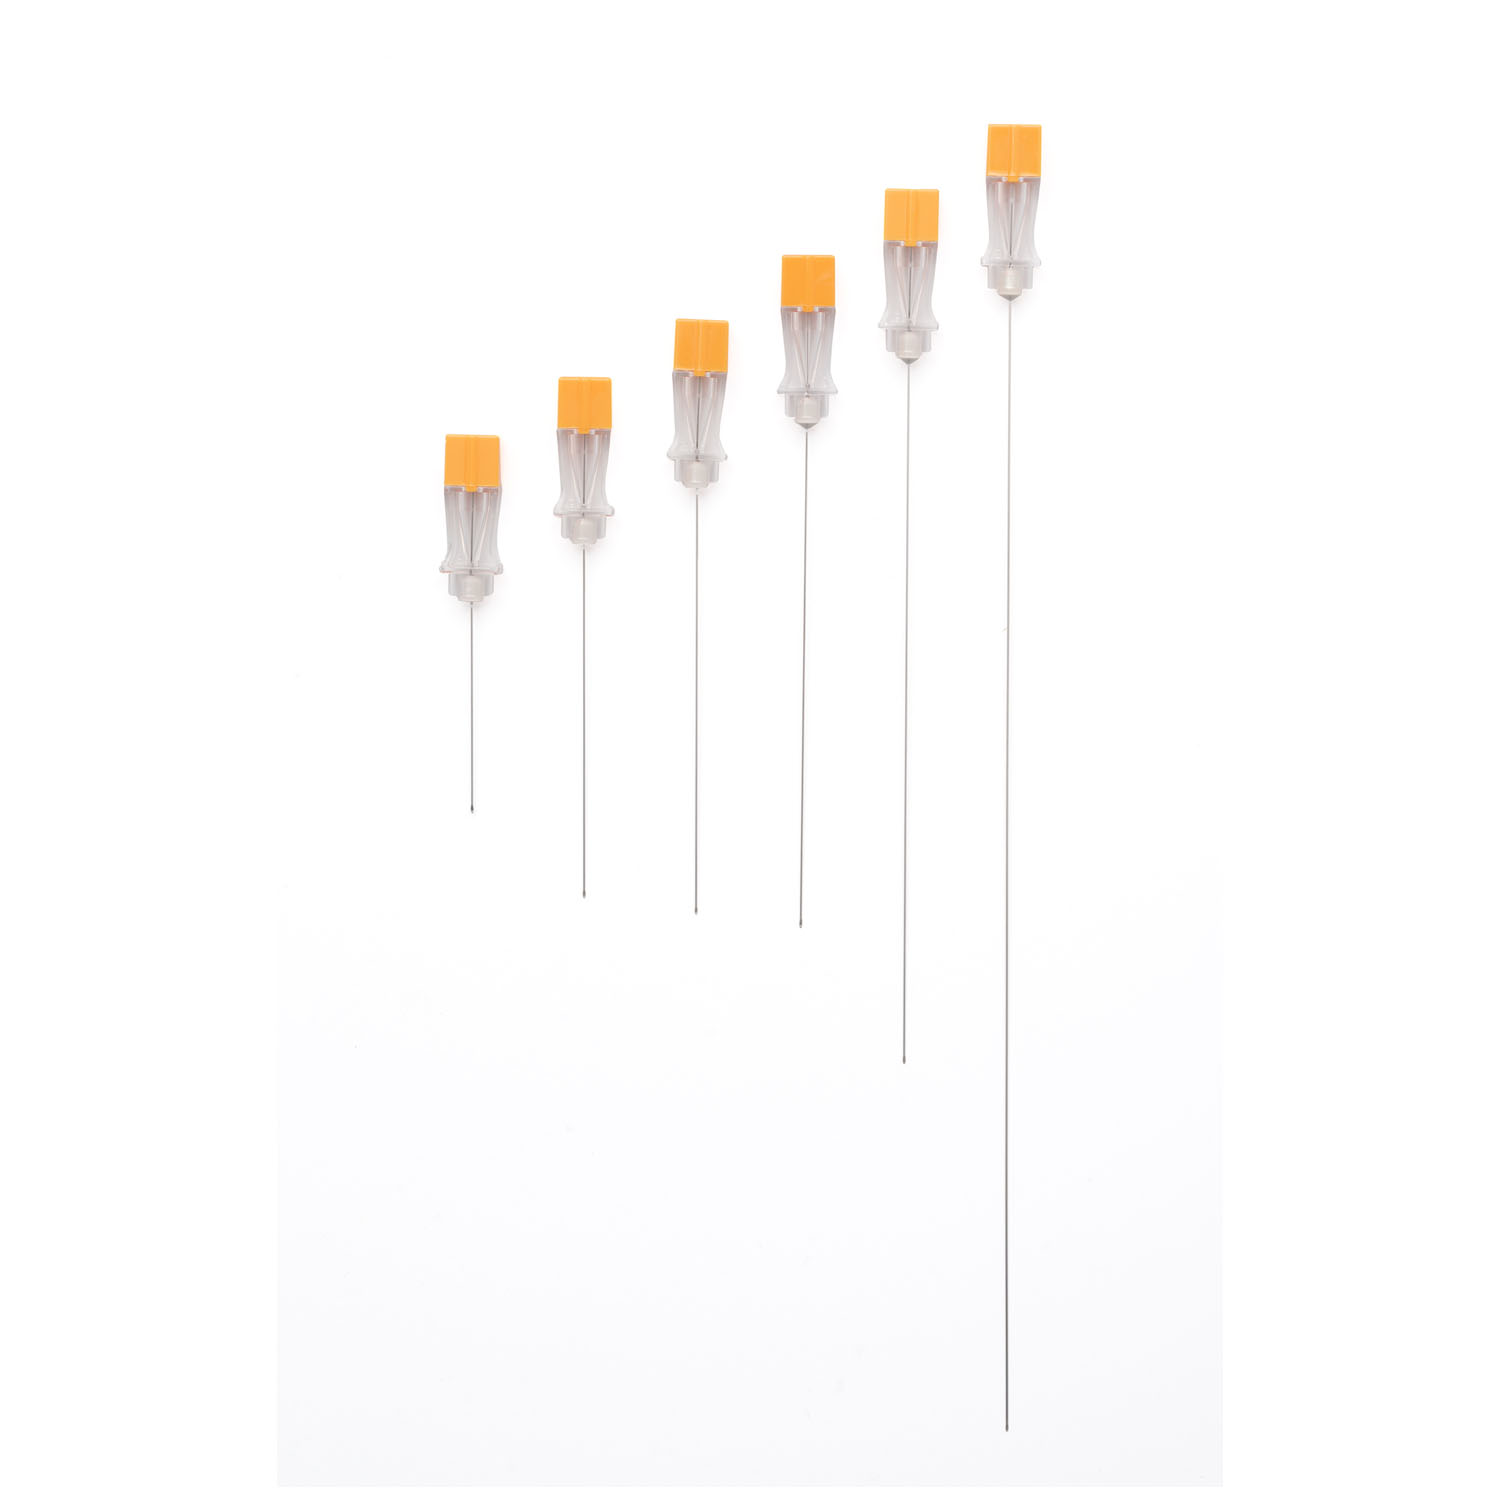 MYCO RELI QUINCKE POINT SPINAL NEEDLES : SN25G501 BX                       $122.60 Stocked